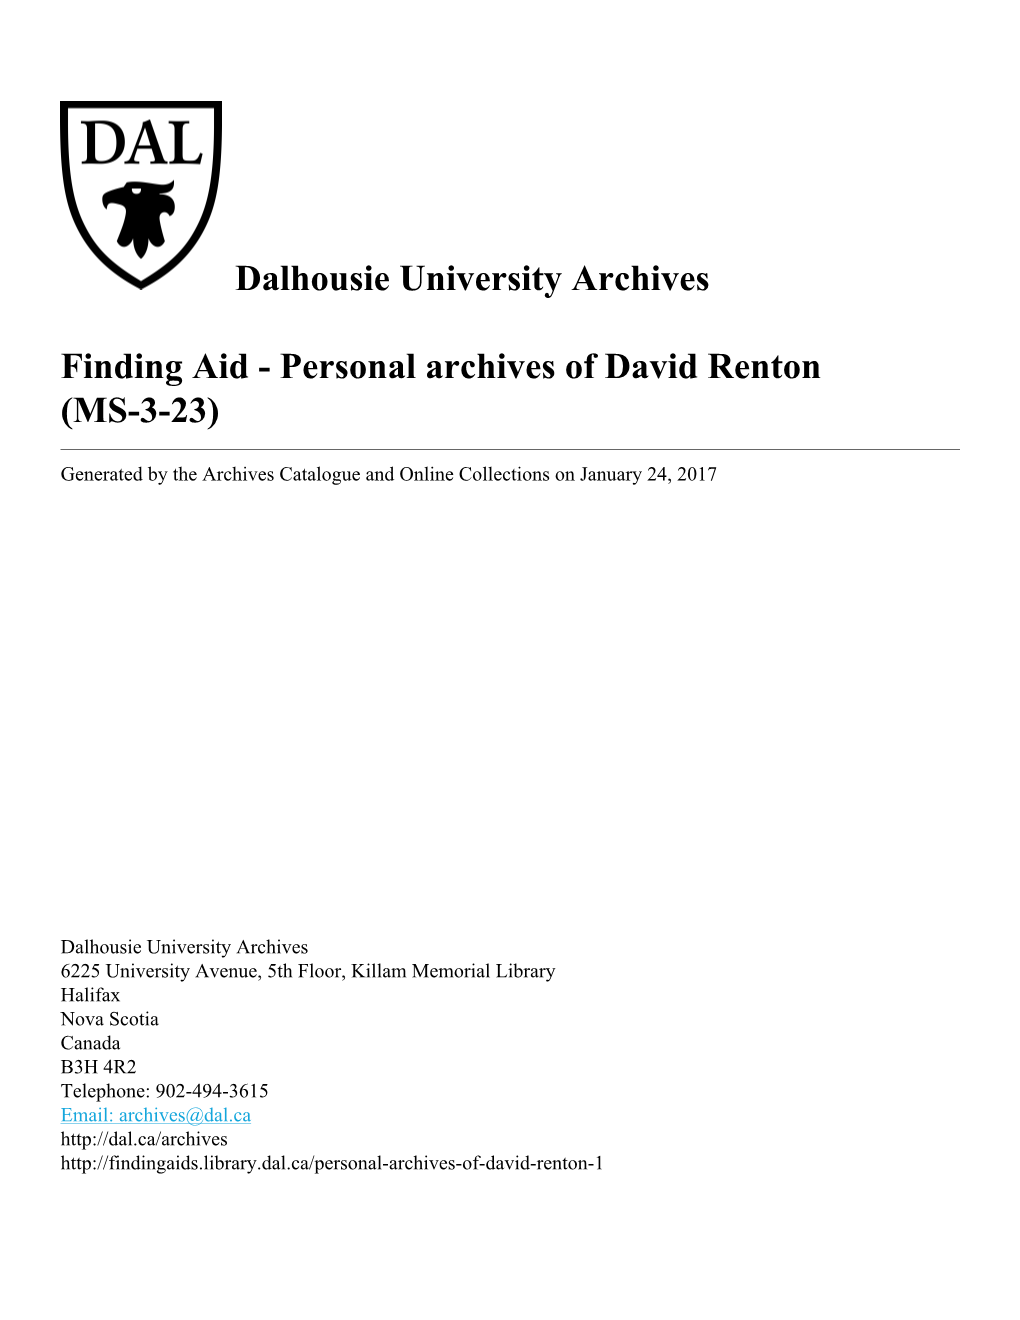 Personal Archives of David Renton (MS-3-23)